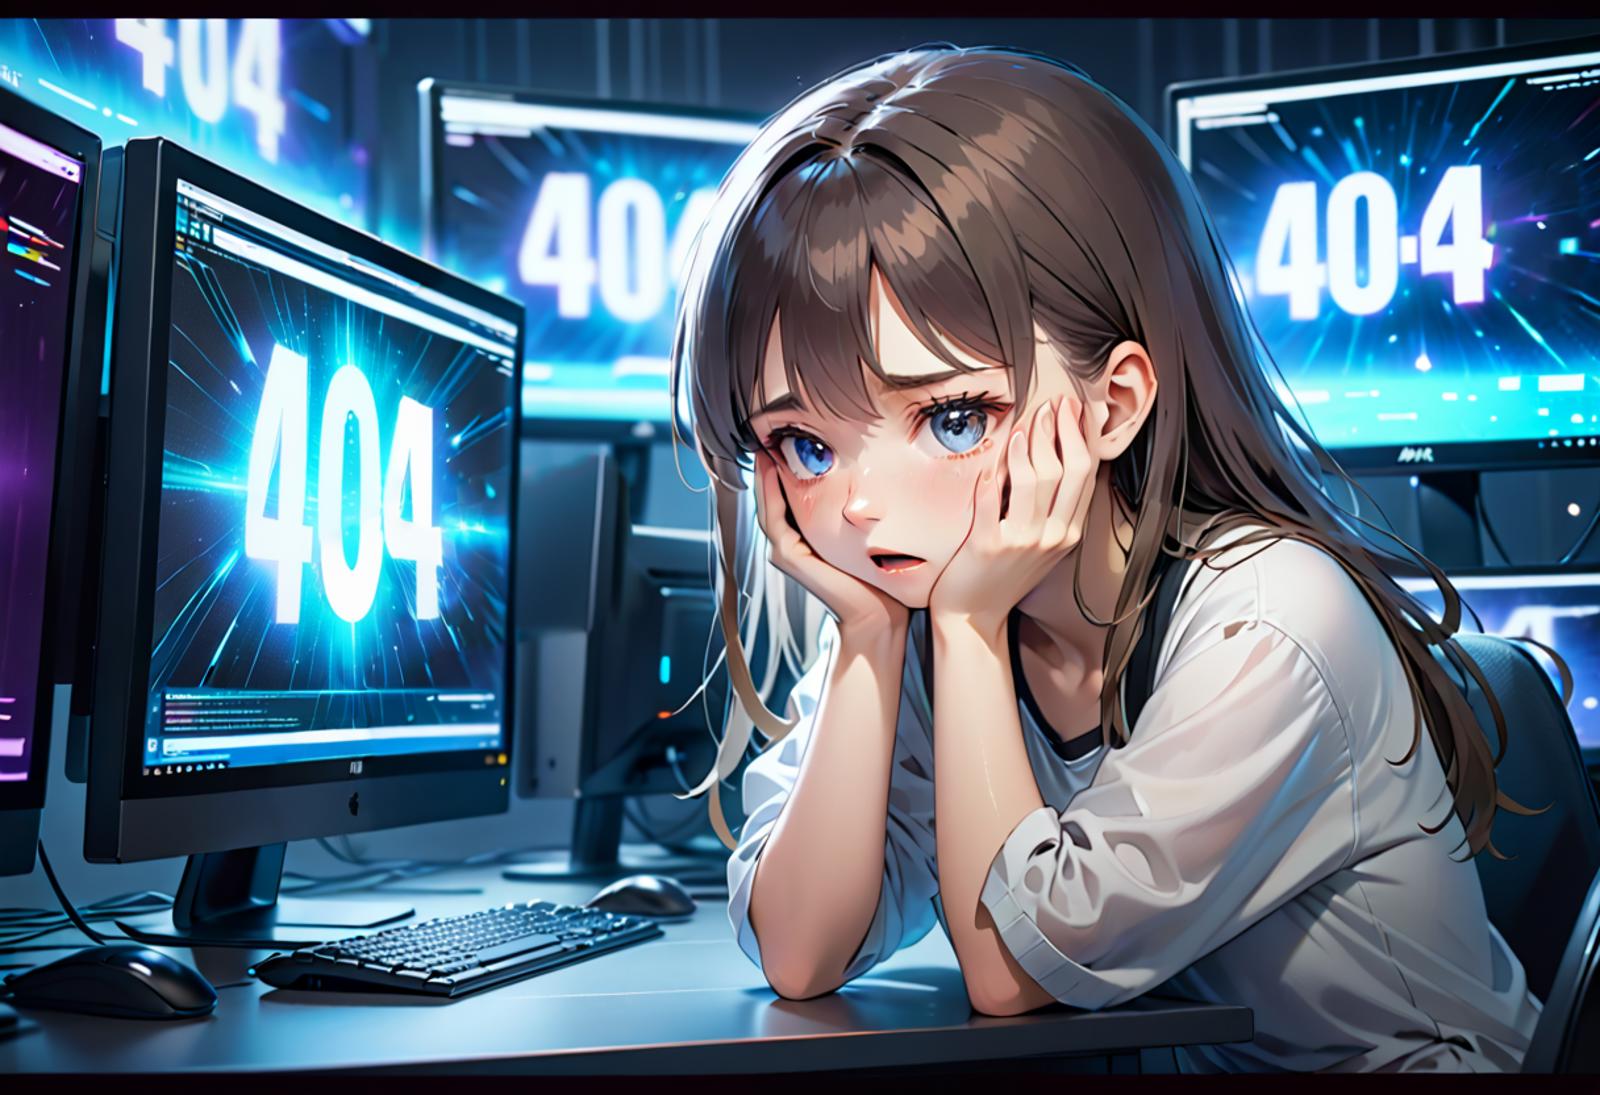 A young girl with a sad expression in front of multiple computer screens.